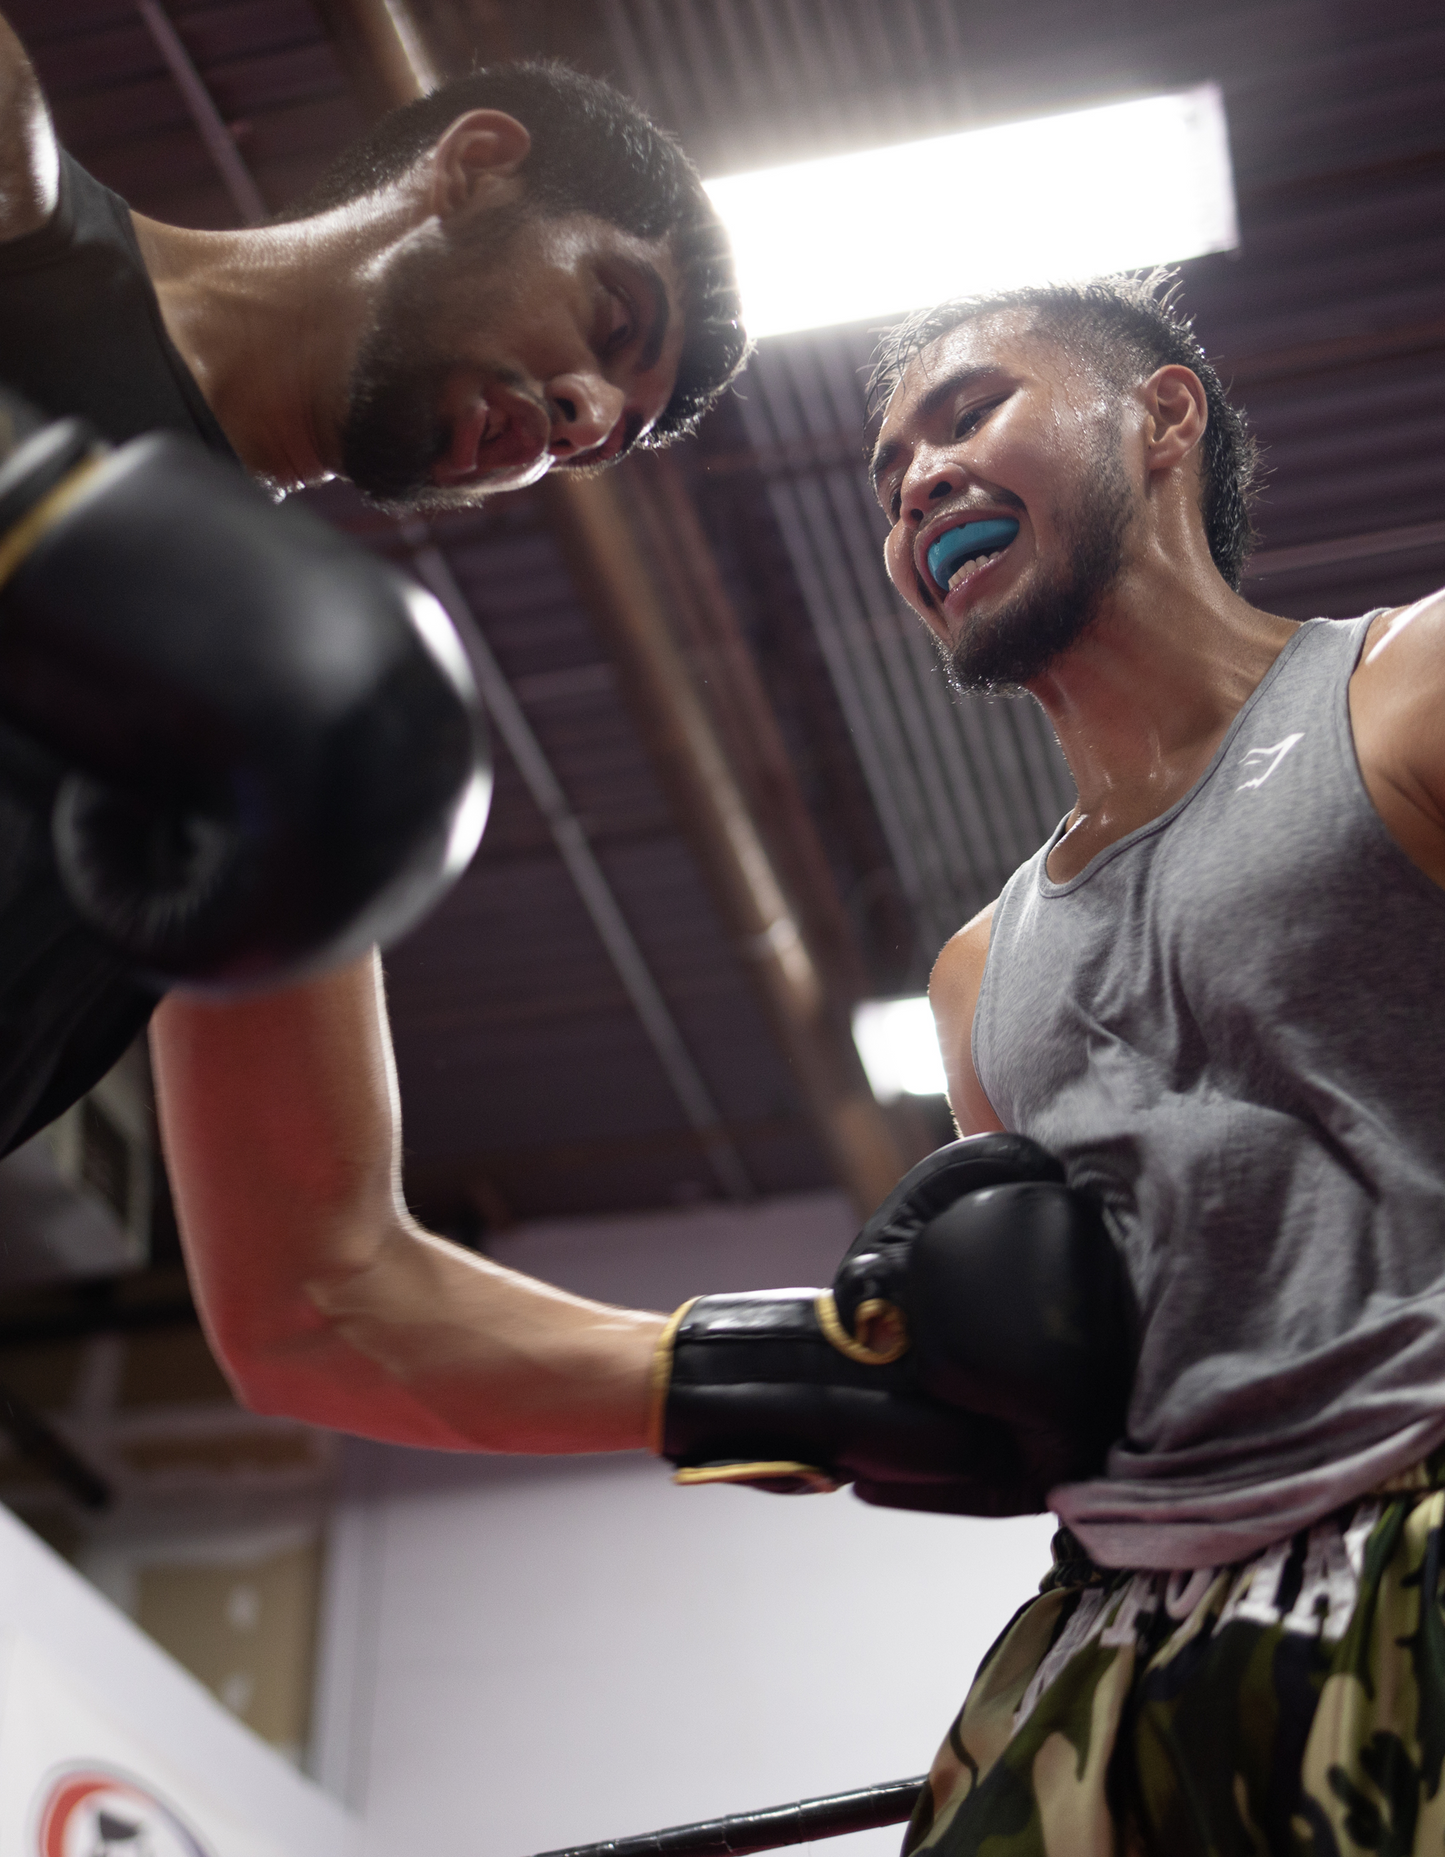 Image of two men sparring during a Muay Thai lesson at Ultimate Martial Arts & Fitness in Mississauga, Ontario, Canada